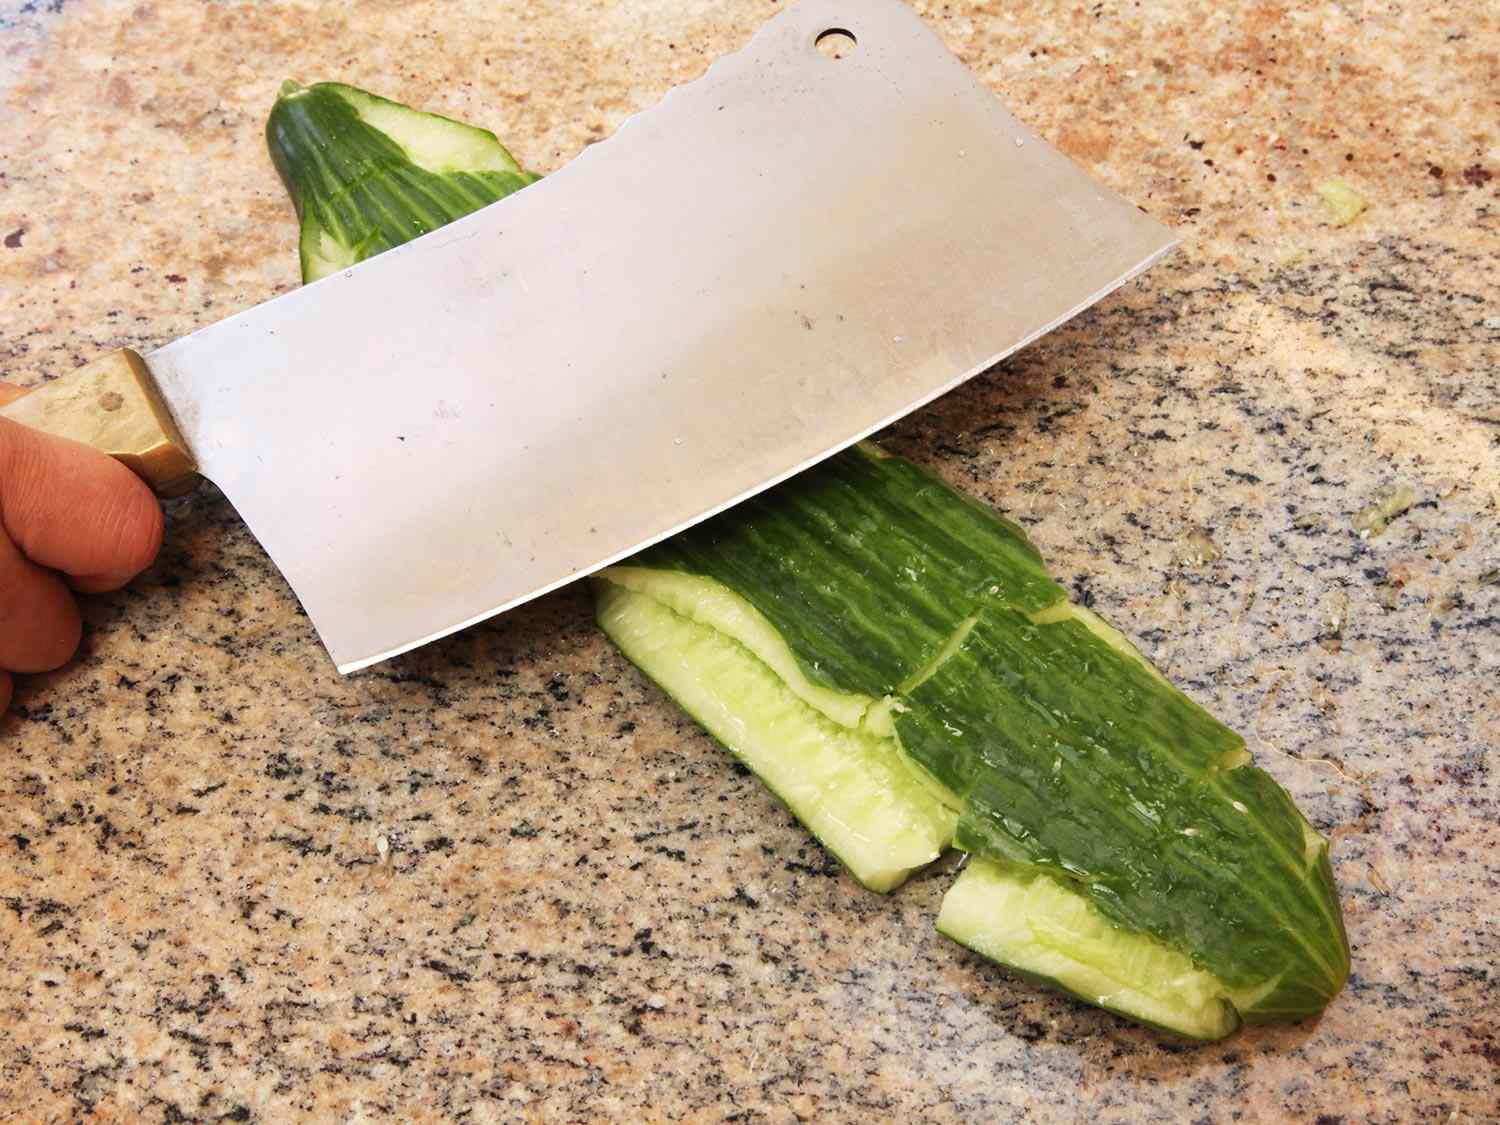 Smashing a cucumber on the counter with the flat side of a cleaver.